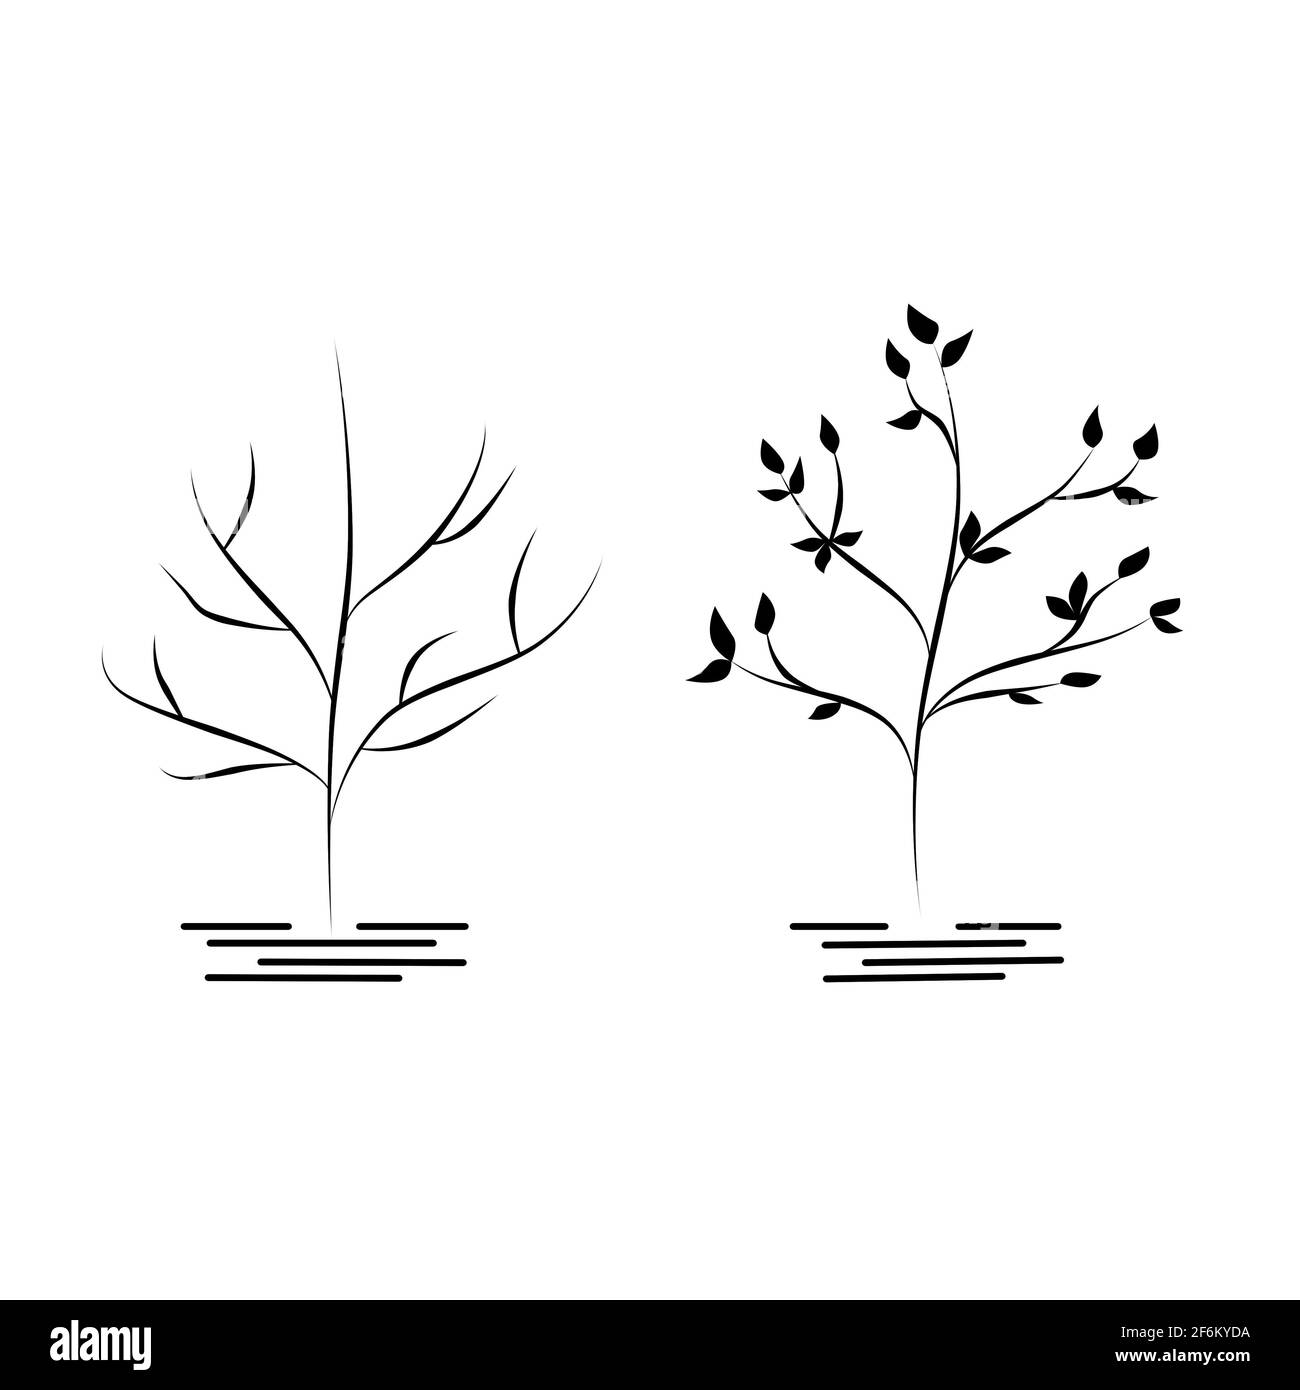 Two trees with foliage and without foliage, nature illustration, design. Outline drawing. Simple cartoon flat style, linear sketch. Black contour. Stock Photo